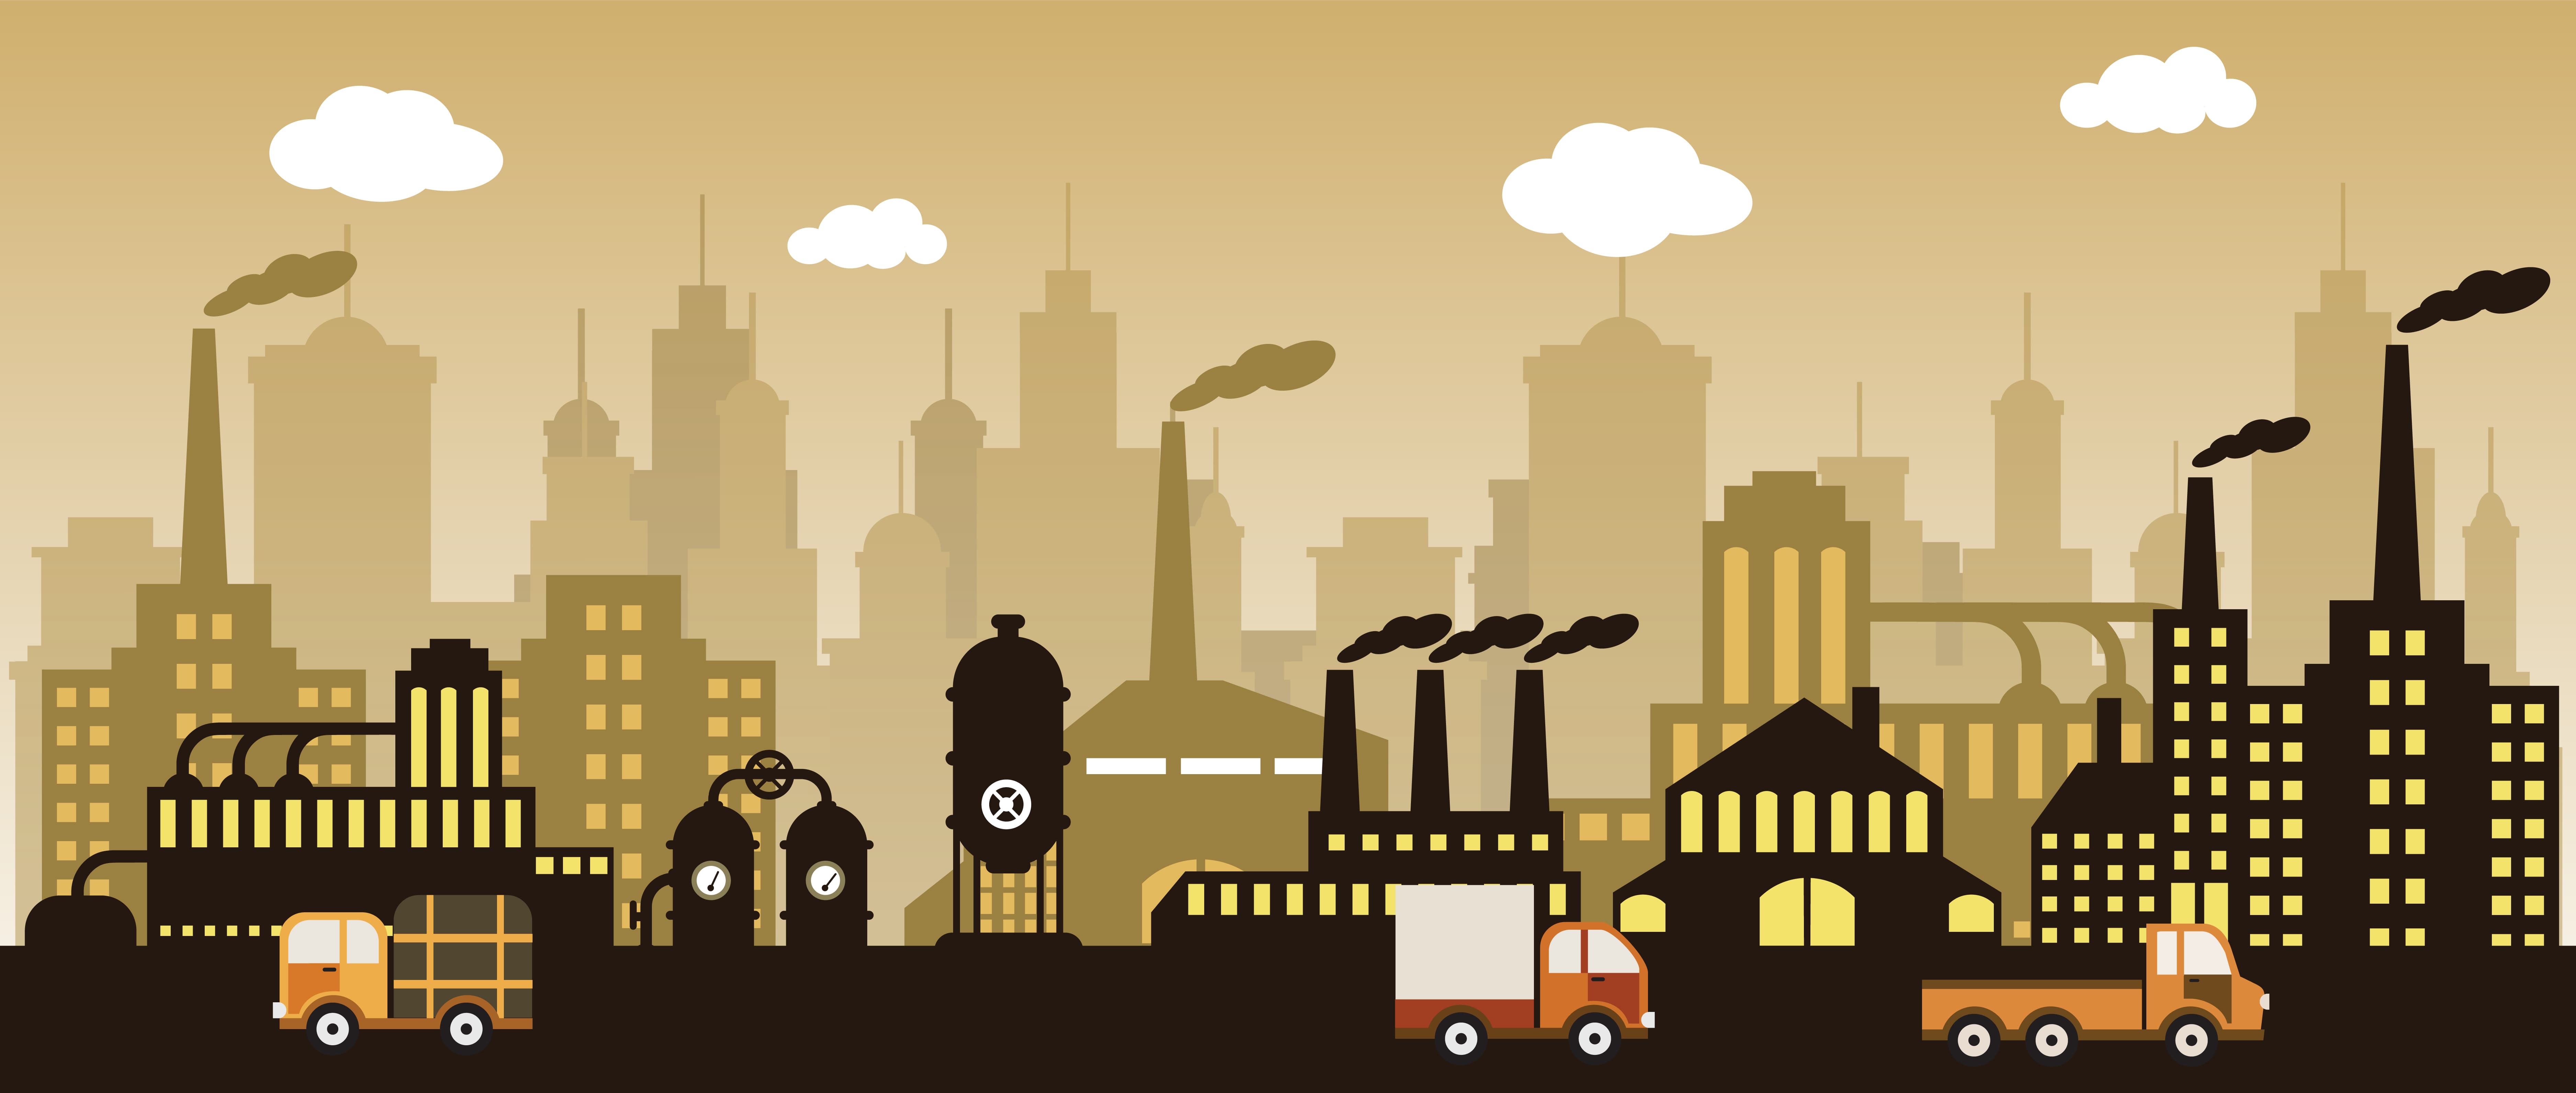 illustration of industrial pollution in the modern world